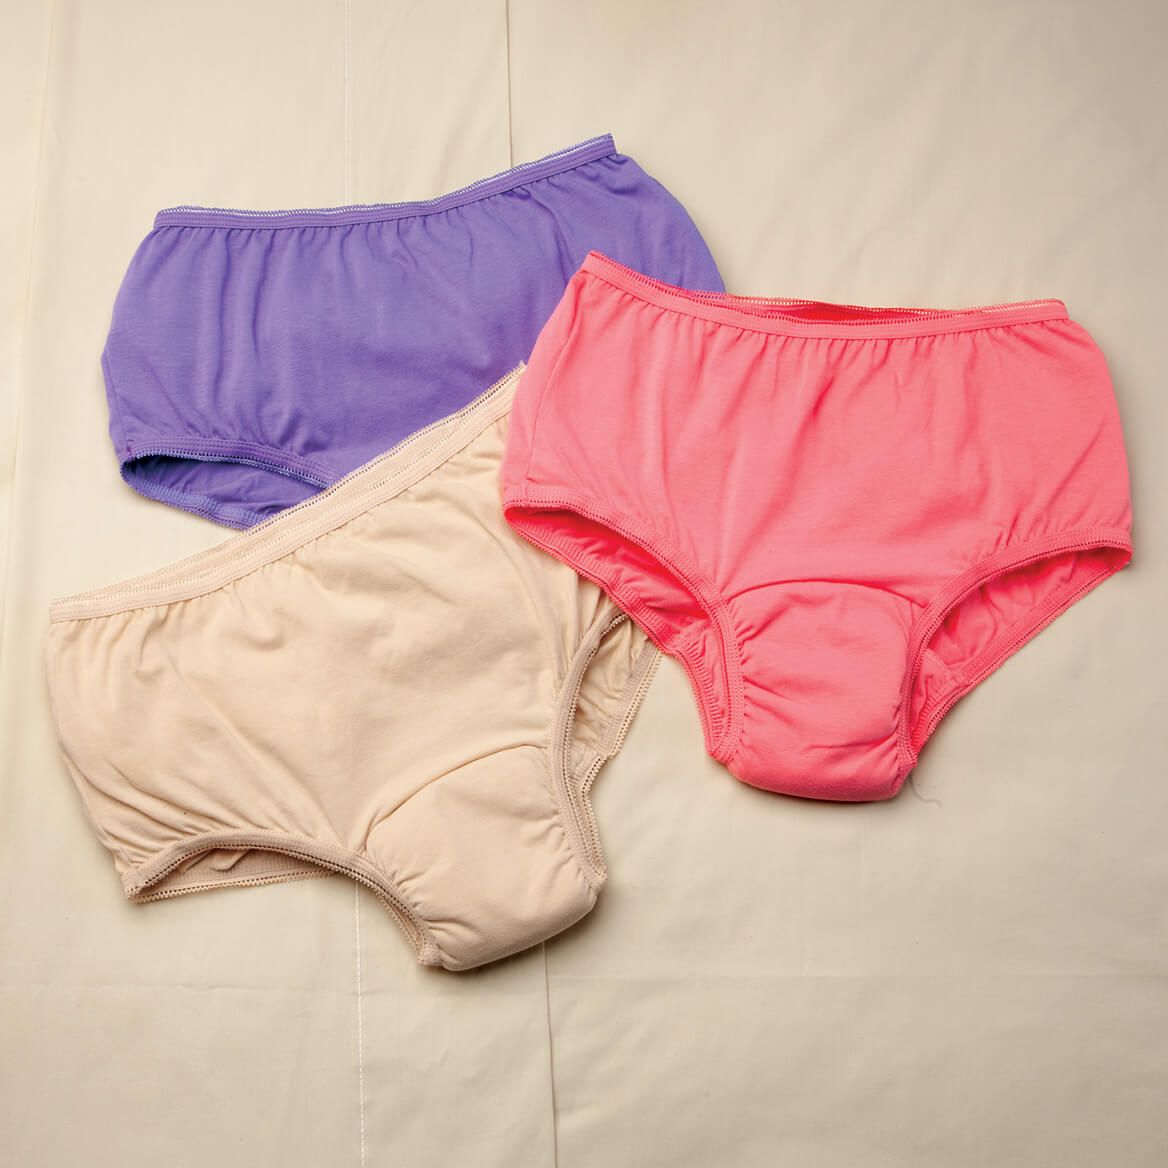 Women's 20 oz. Incontinence Briefs 3 Pack, Assorted Colors + '-' + 362413